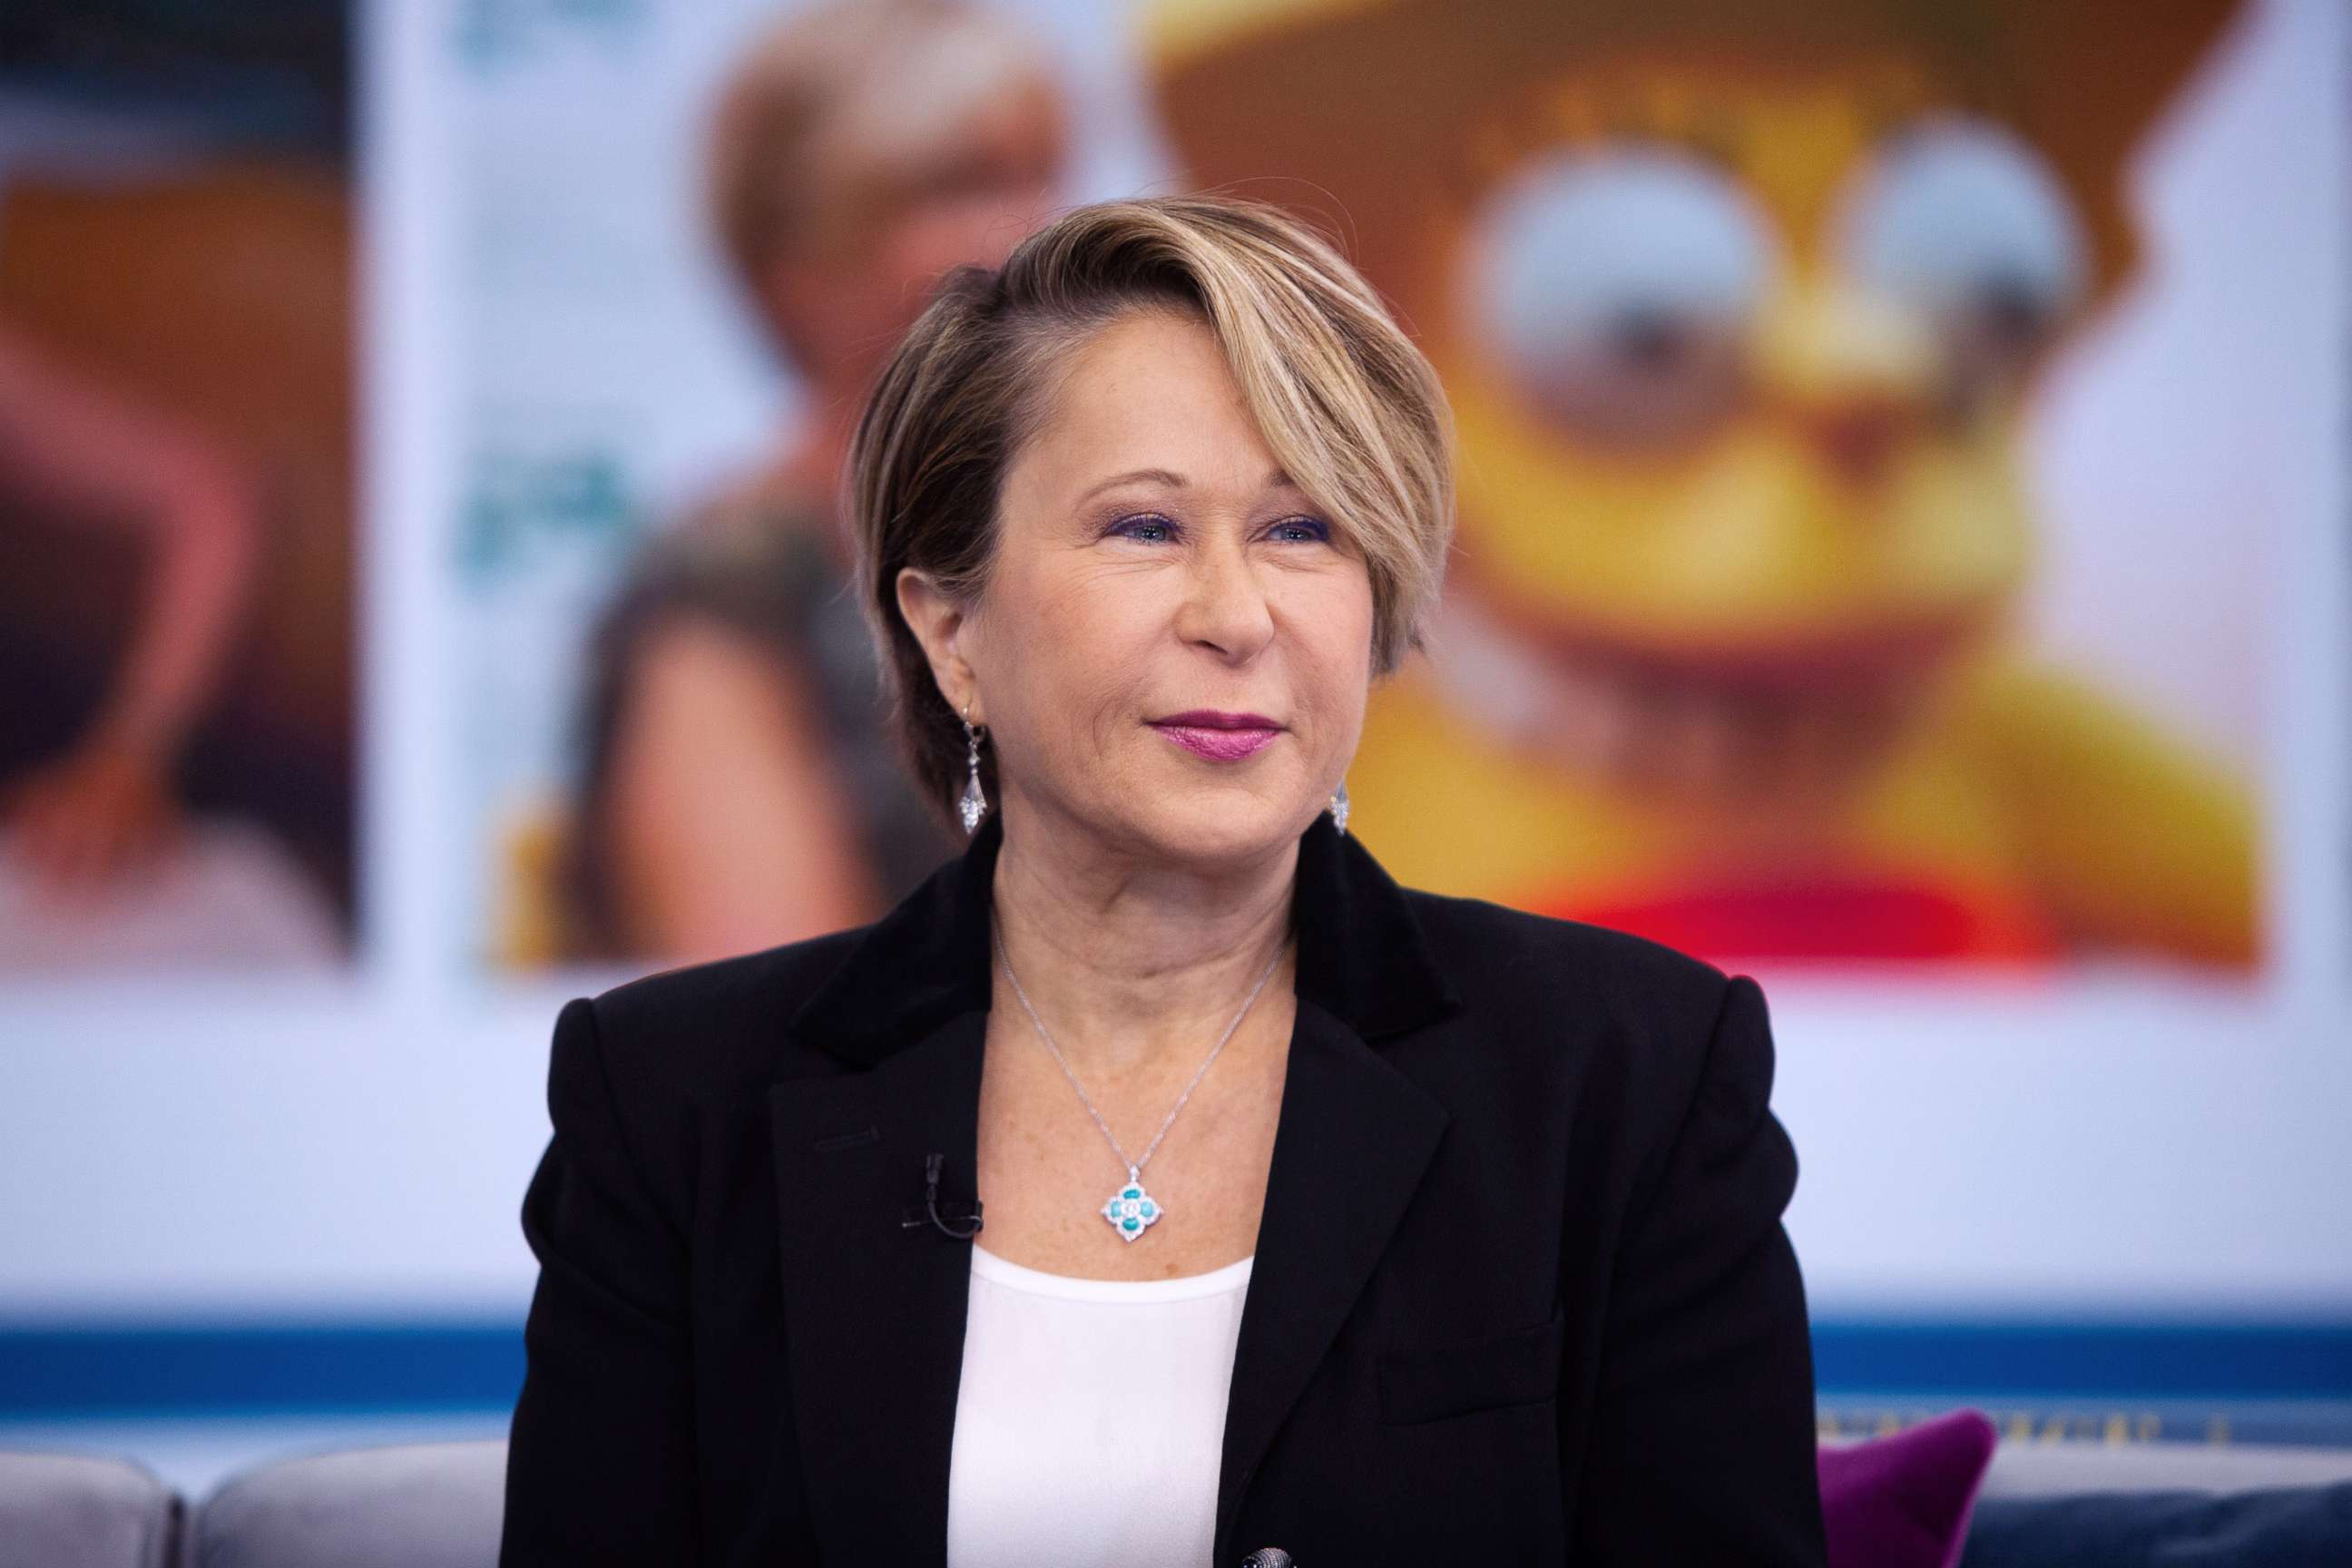 PHOTO: Yeardley Smith, who is the voice of Lisa Simpson on the TV show, "The Simpsons," is interviewed in New York, Jan. 15, 2019.